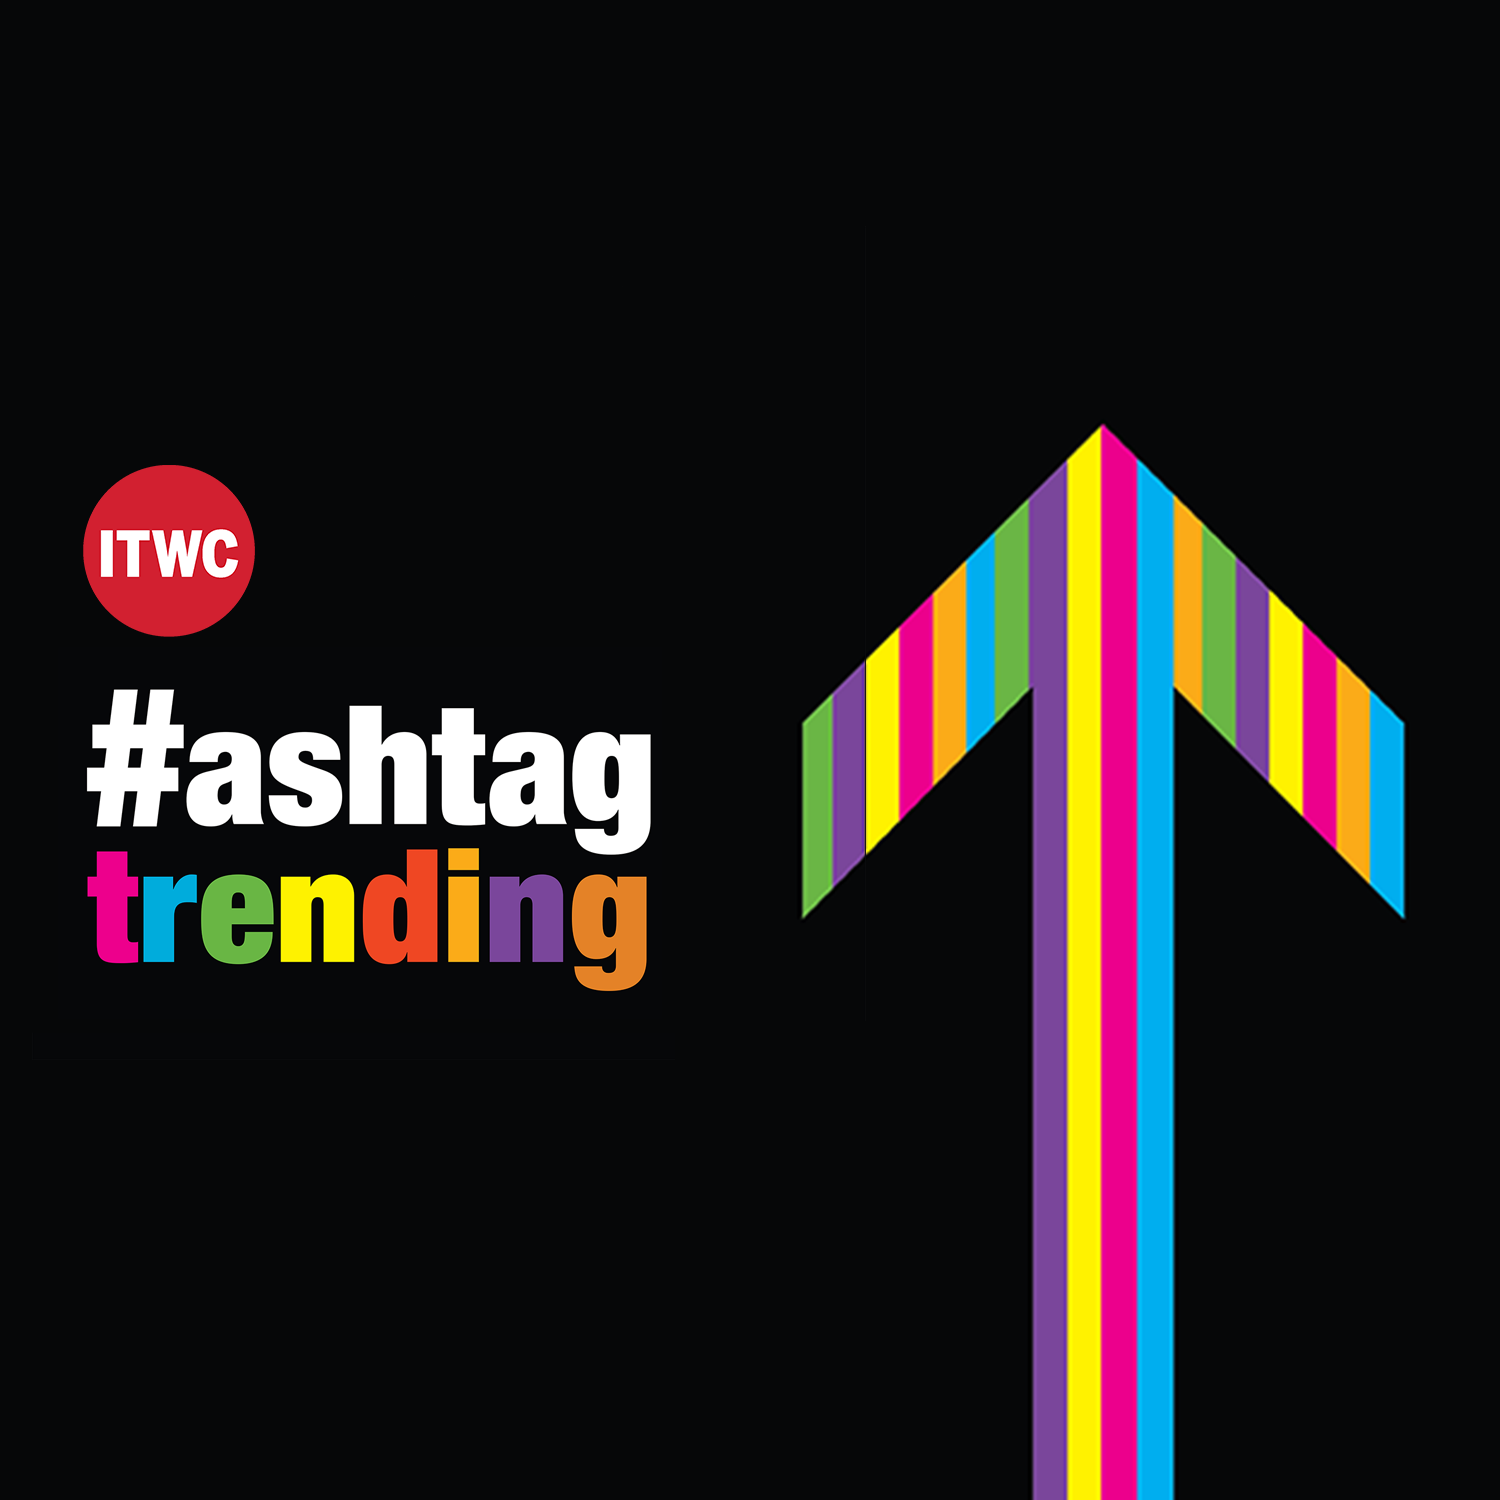 Hashtag Trending, May 11, 2021 – High pressure sales tactics at The Source; Apple doubles down …